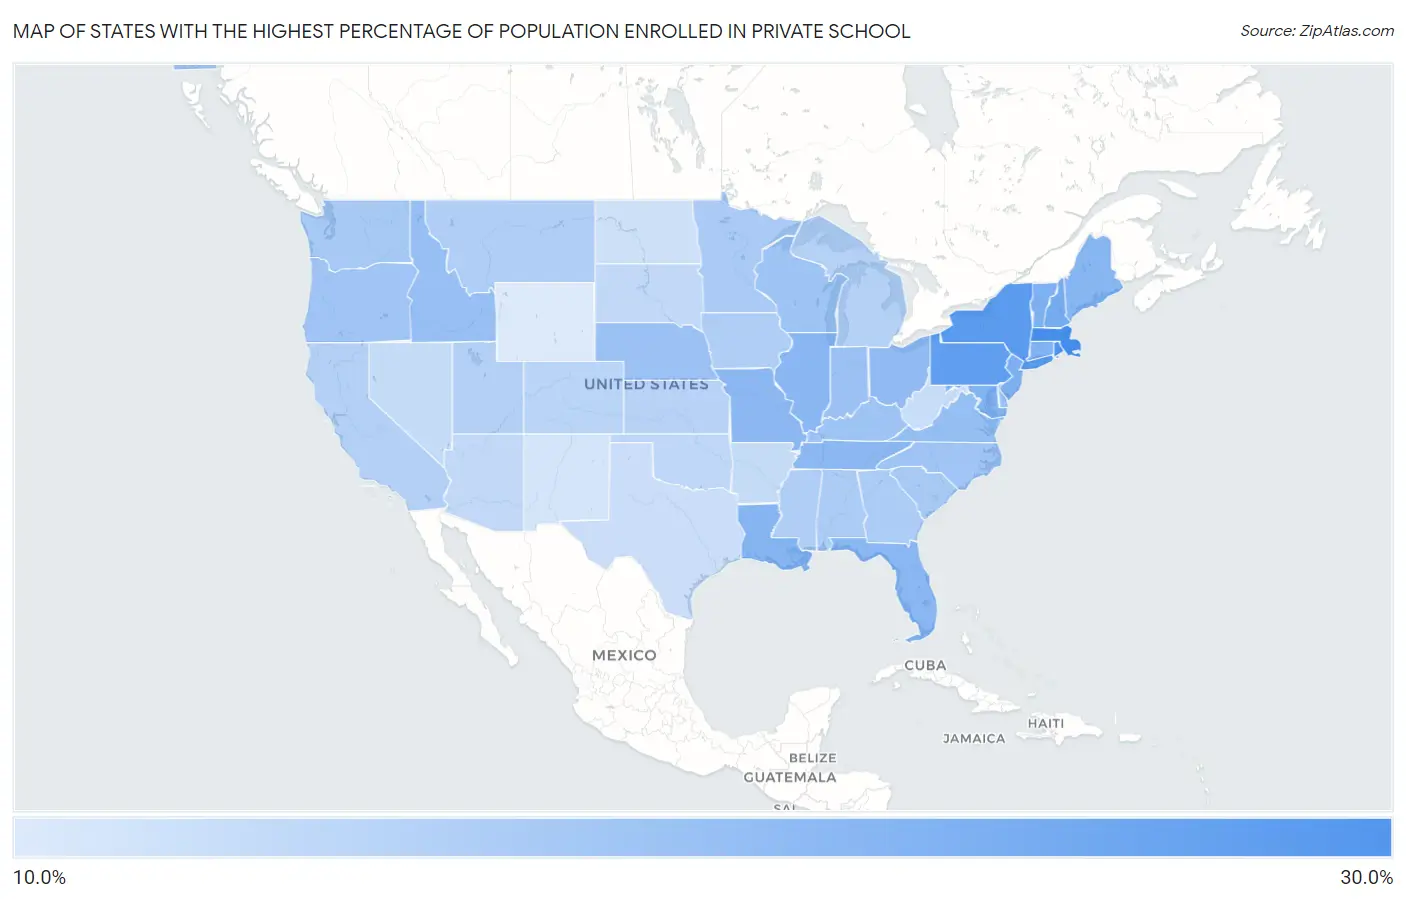 States with the Highest Percentage of Population Enrolled in Private School in the United States Map